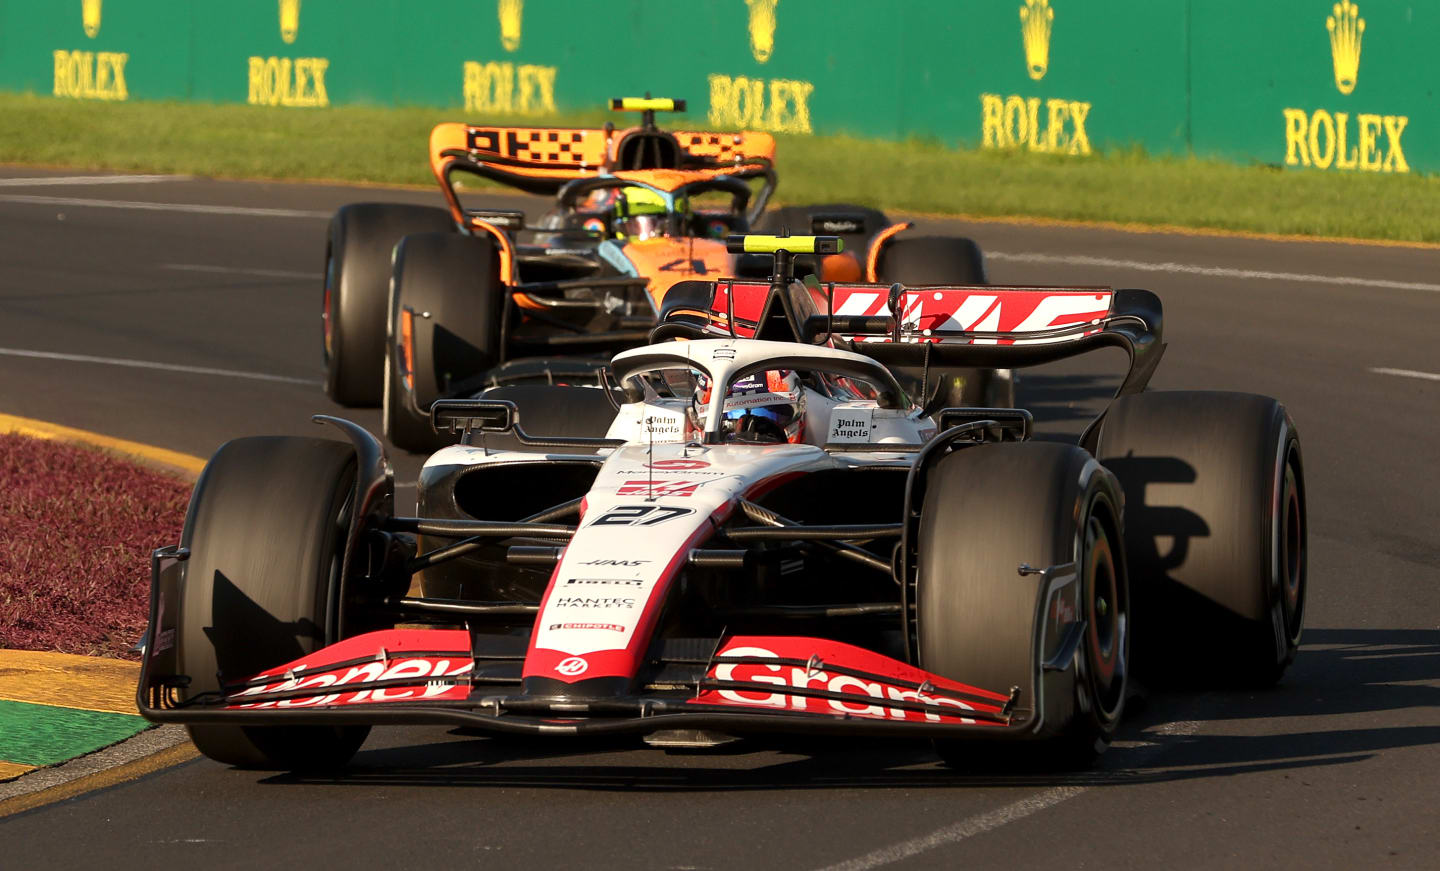 MELBOURNE, AUSTRALIA - APRIL 02: Nico Hulkenberg of Germany driving the (27) Haas F1 VF-23 Ferrari on track during the F1 Grand Prix of Australia at Albert Park Grand Prix Circuit on April 02, 2023 in Melbourne, Australia. (Photo by Robert Cianflone/Getty Images)